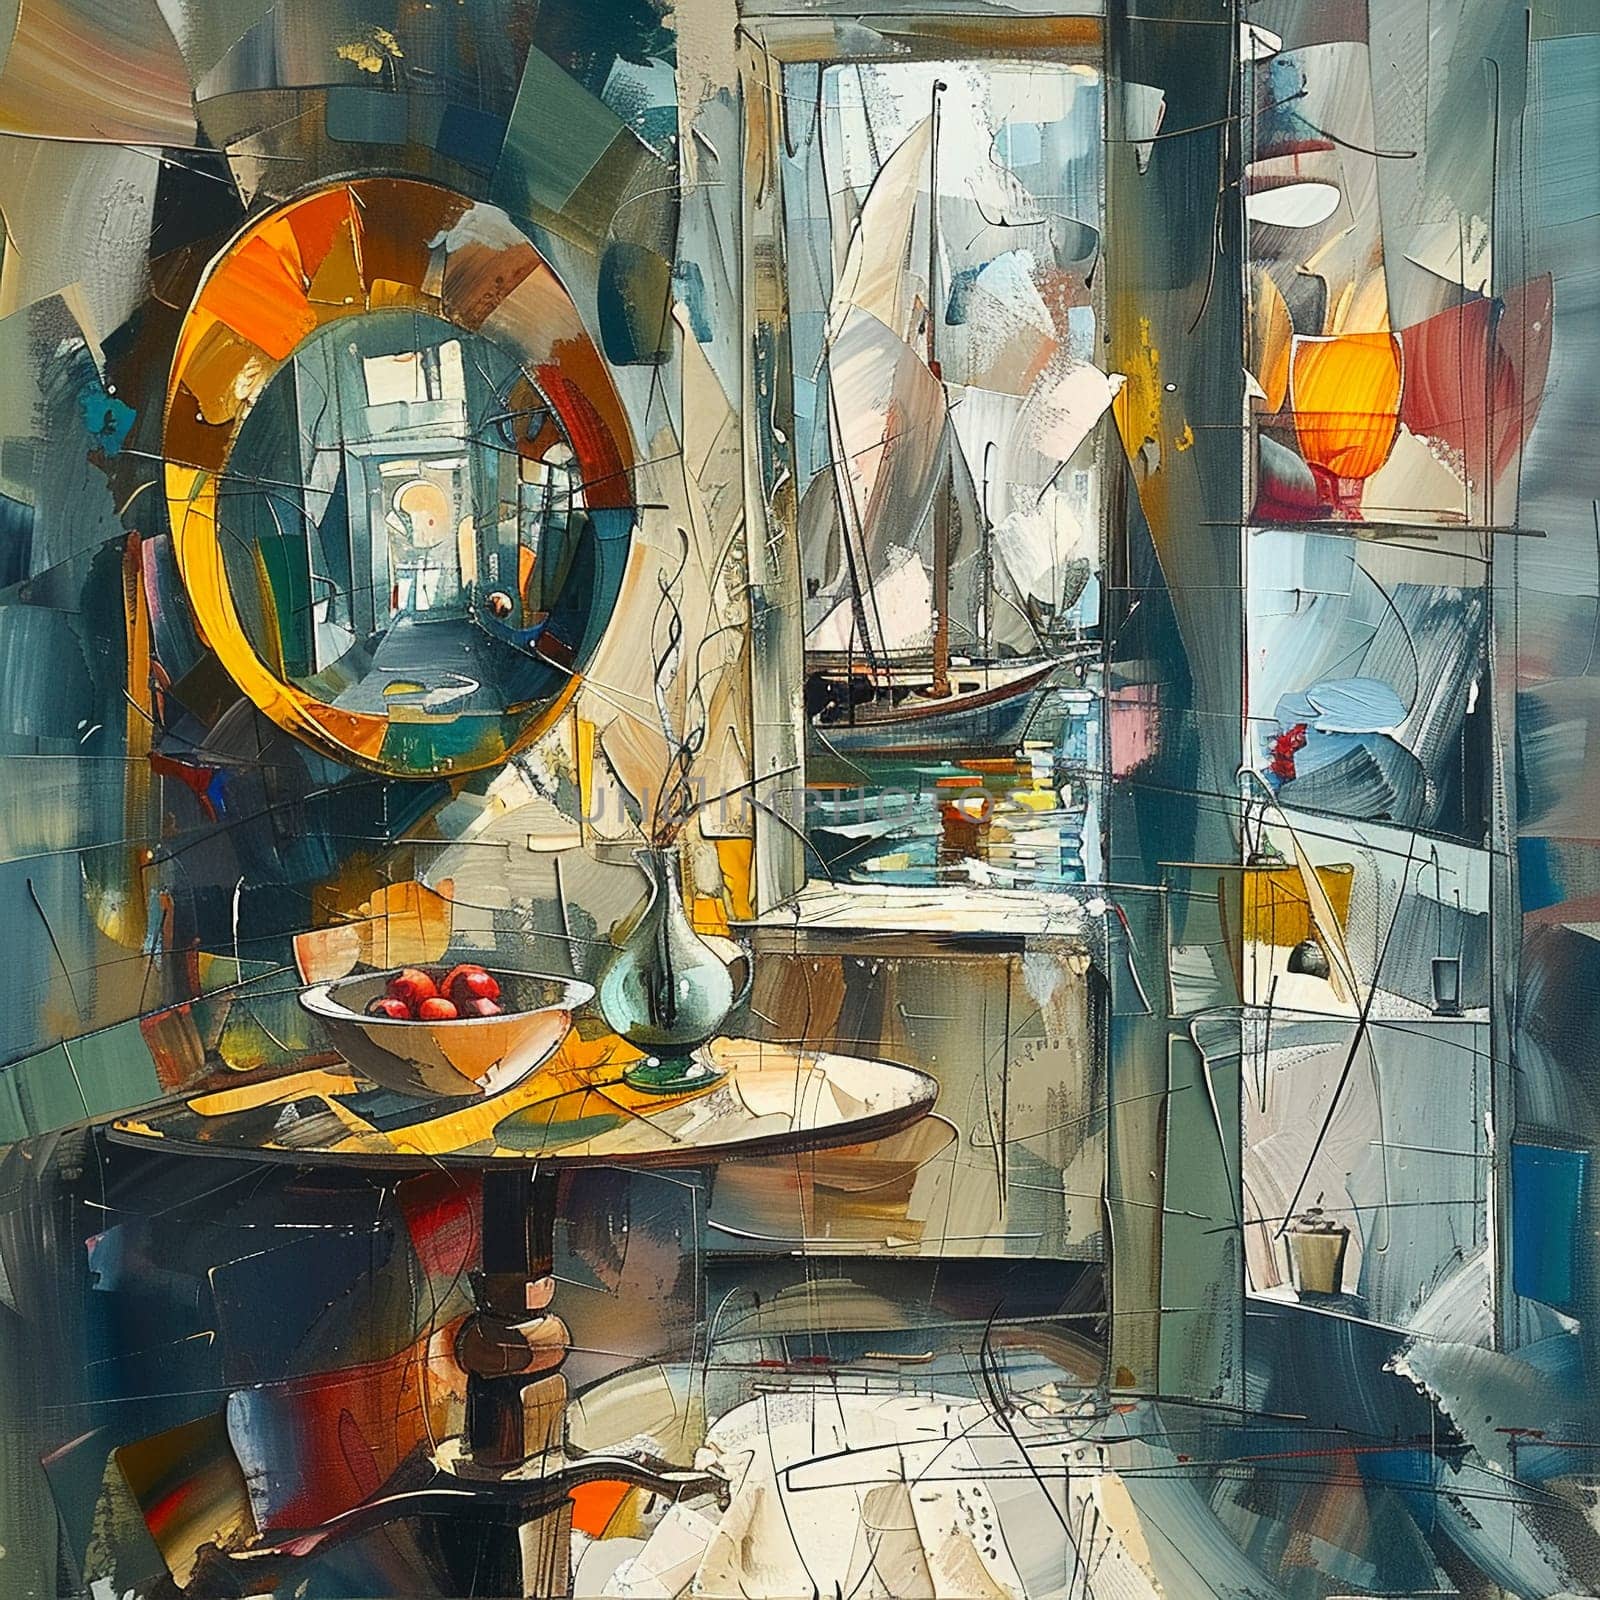 Artist's studio chaos painted in a dynamic, cubist style, with bold colors and abstract shapes.